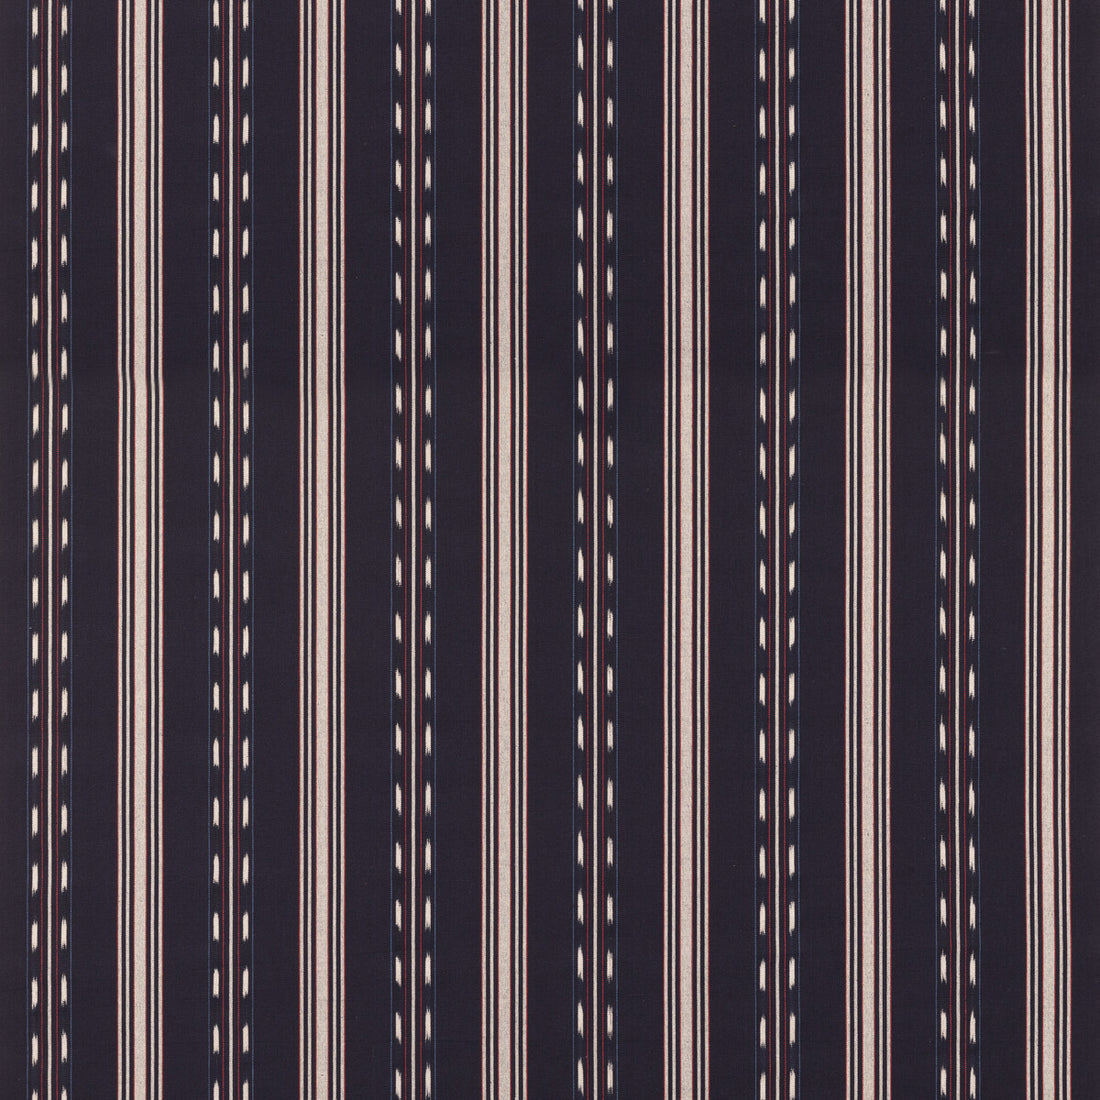 Eastwind Stripe fabric in indigo/red color - pattern FD830.G103.0 - by Mulberry in the Westerly Stripes collection